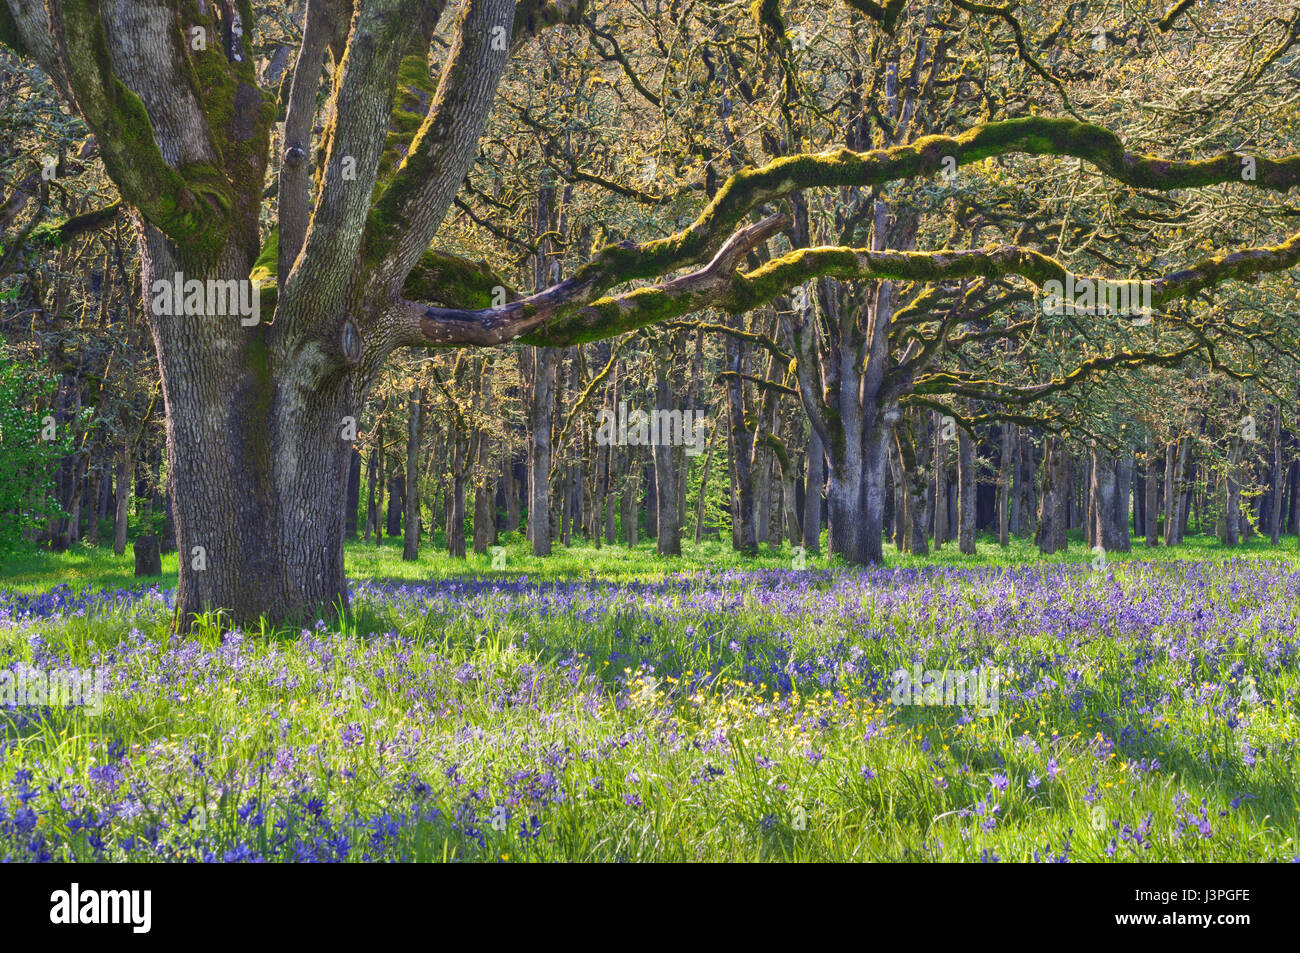 Ancient Oak tree in soft sunlight with meadow of blue Camas wildflowers Stock Photo